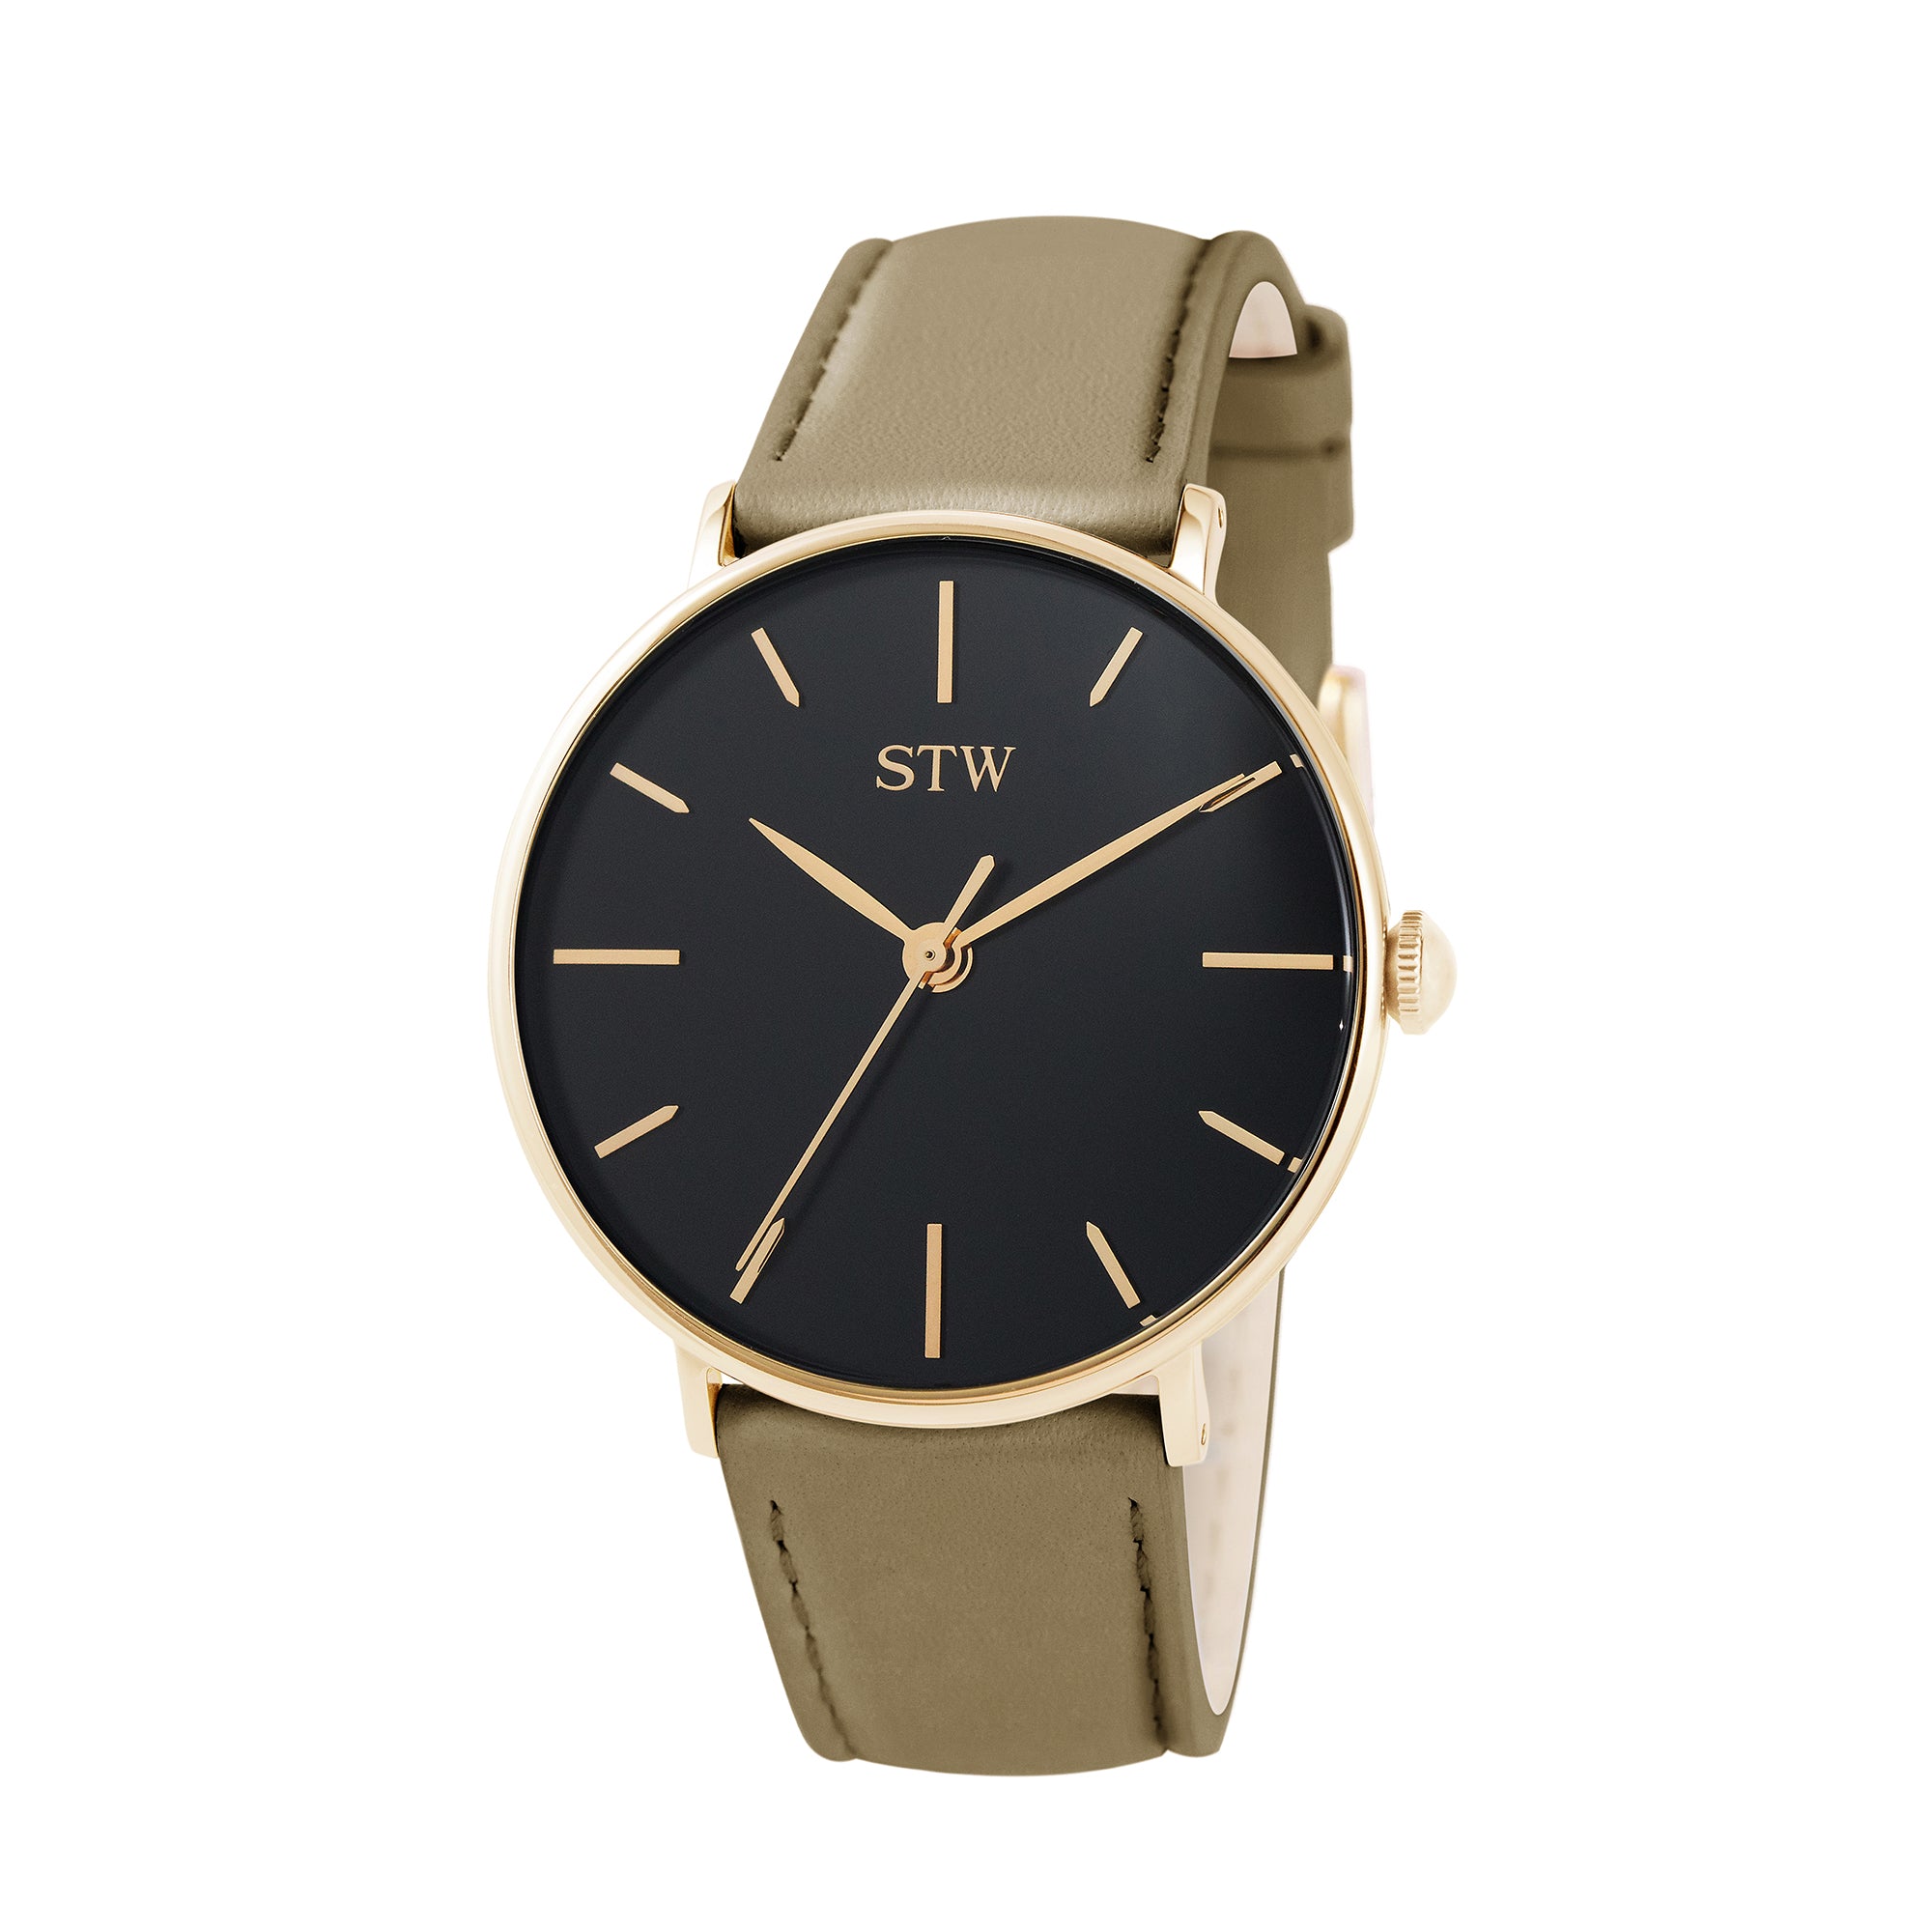 THE HERITAGE -  BLACK DIAL / OLIVE LEATHER STRAP WATCH